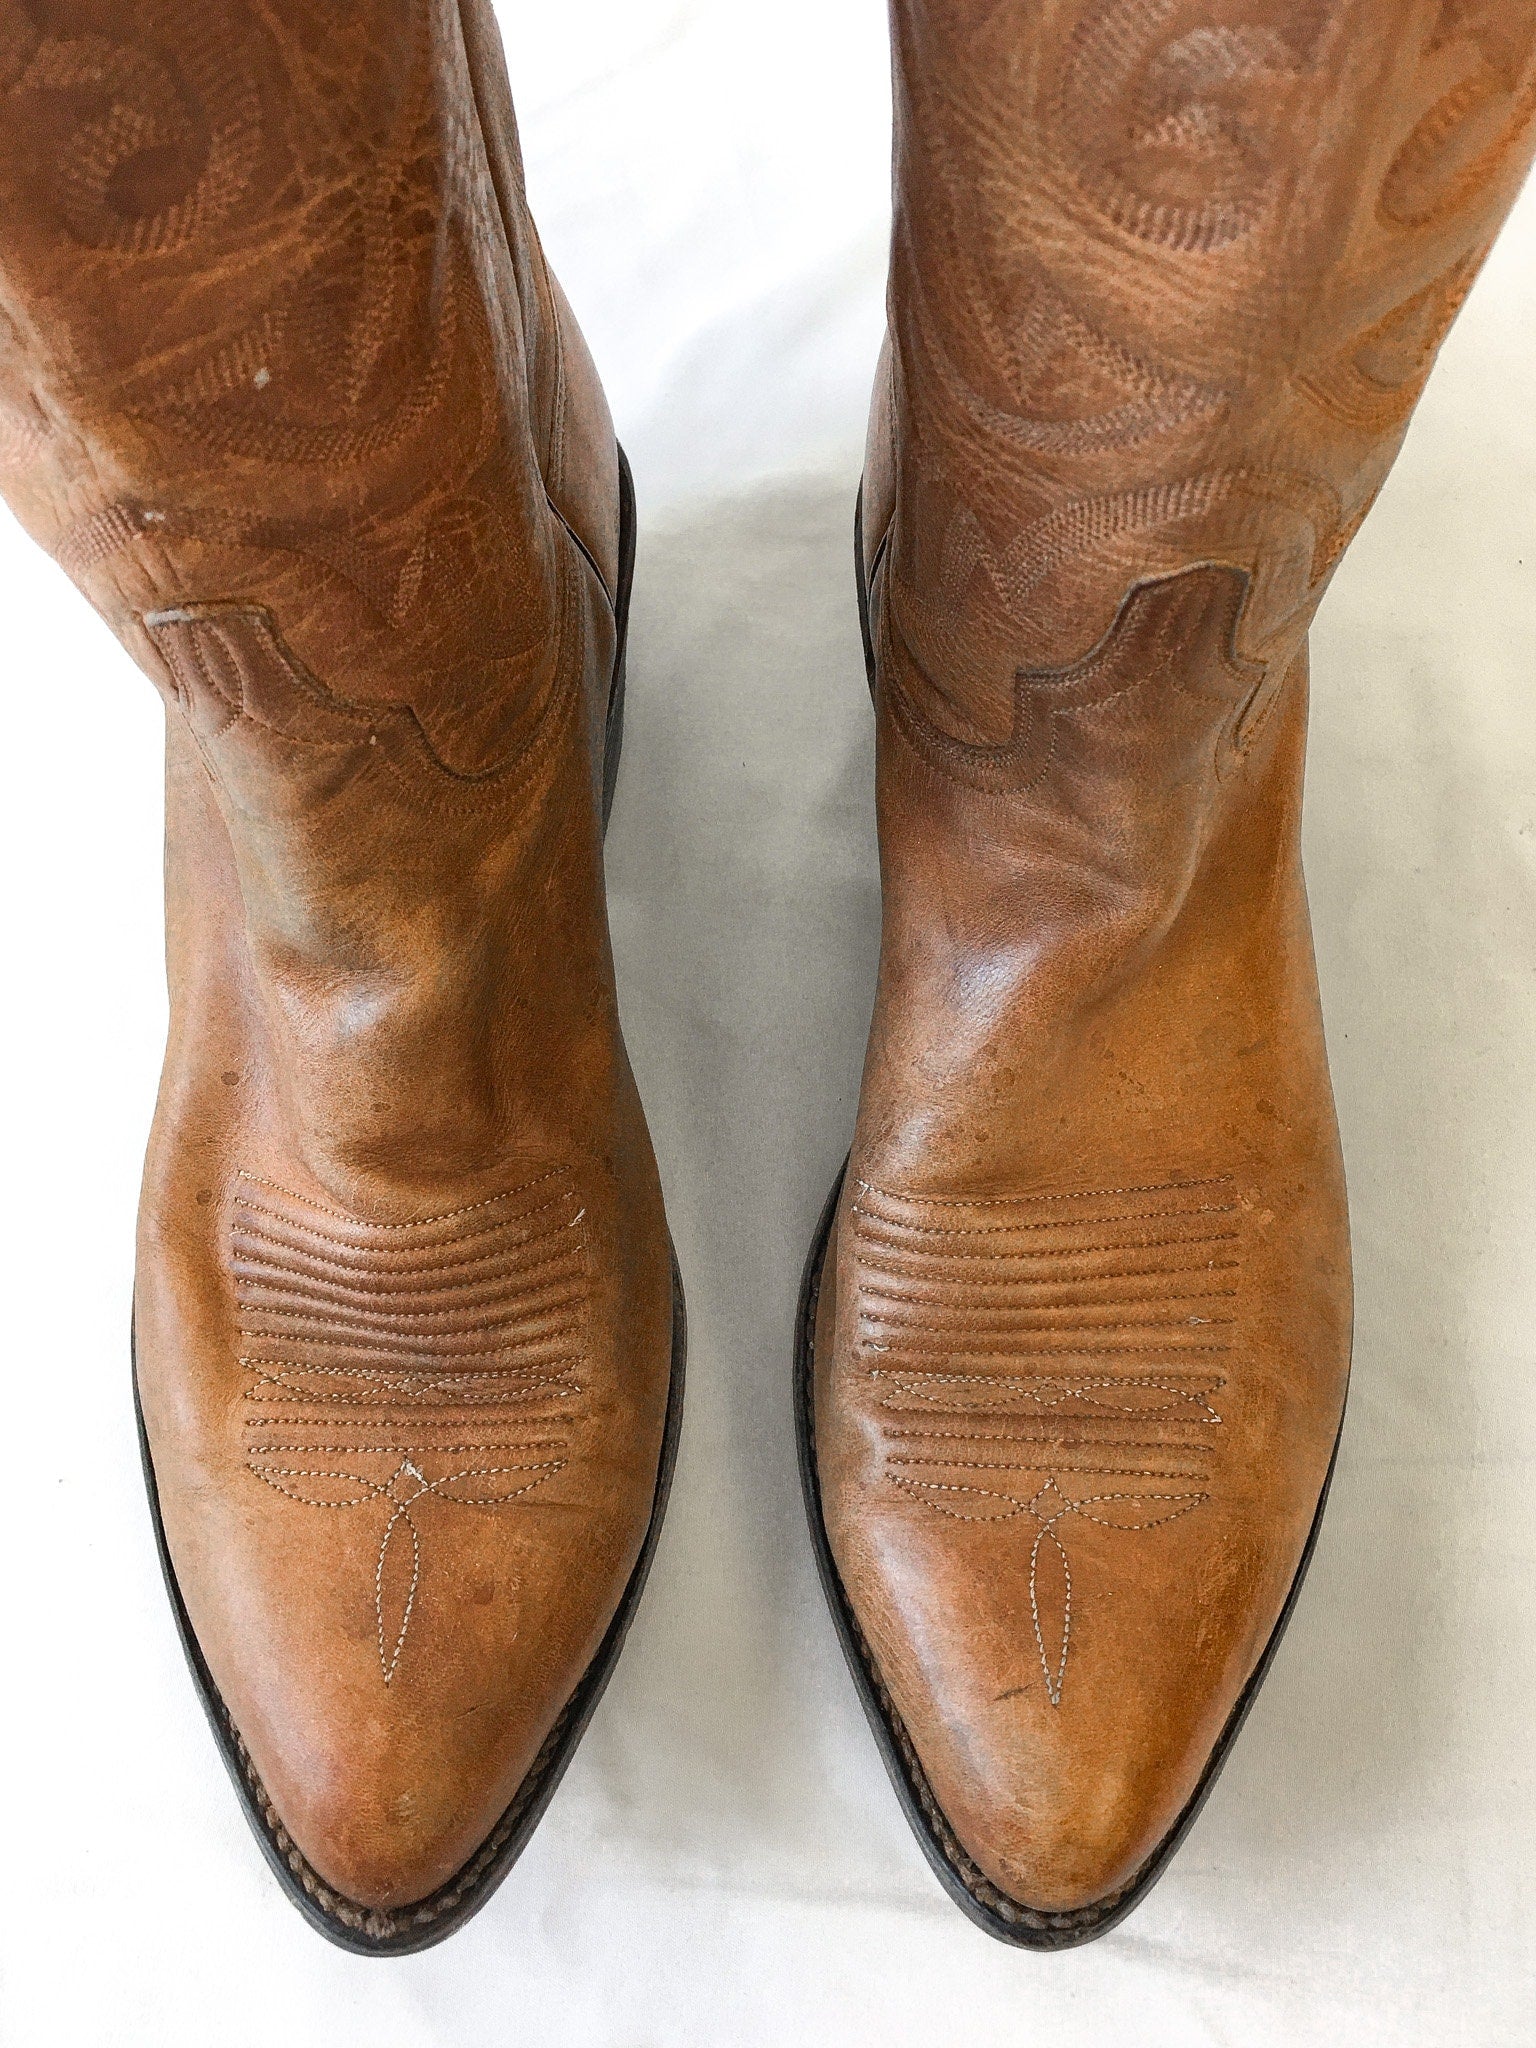 Vintage Lucchese Brown Leather Embroidered Cowboy Boots, Men's Sz. 9.5D, Vintage Lucchese Western Boots